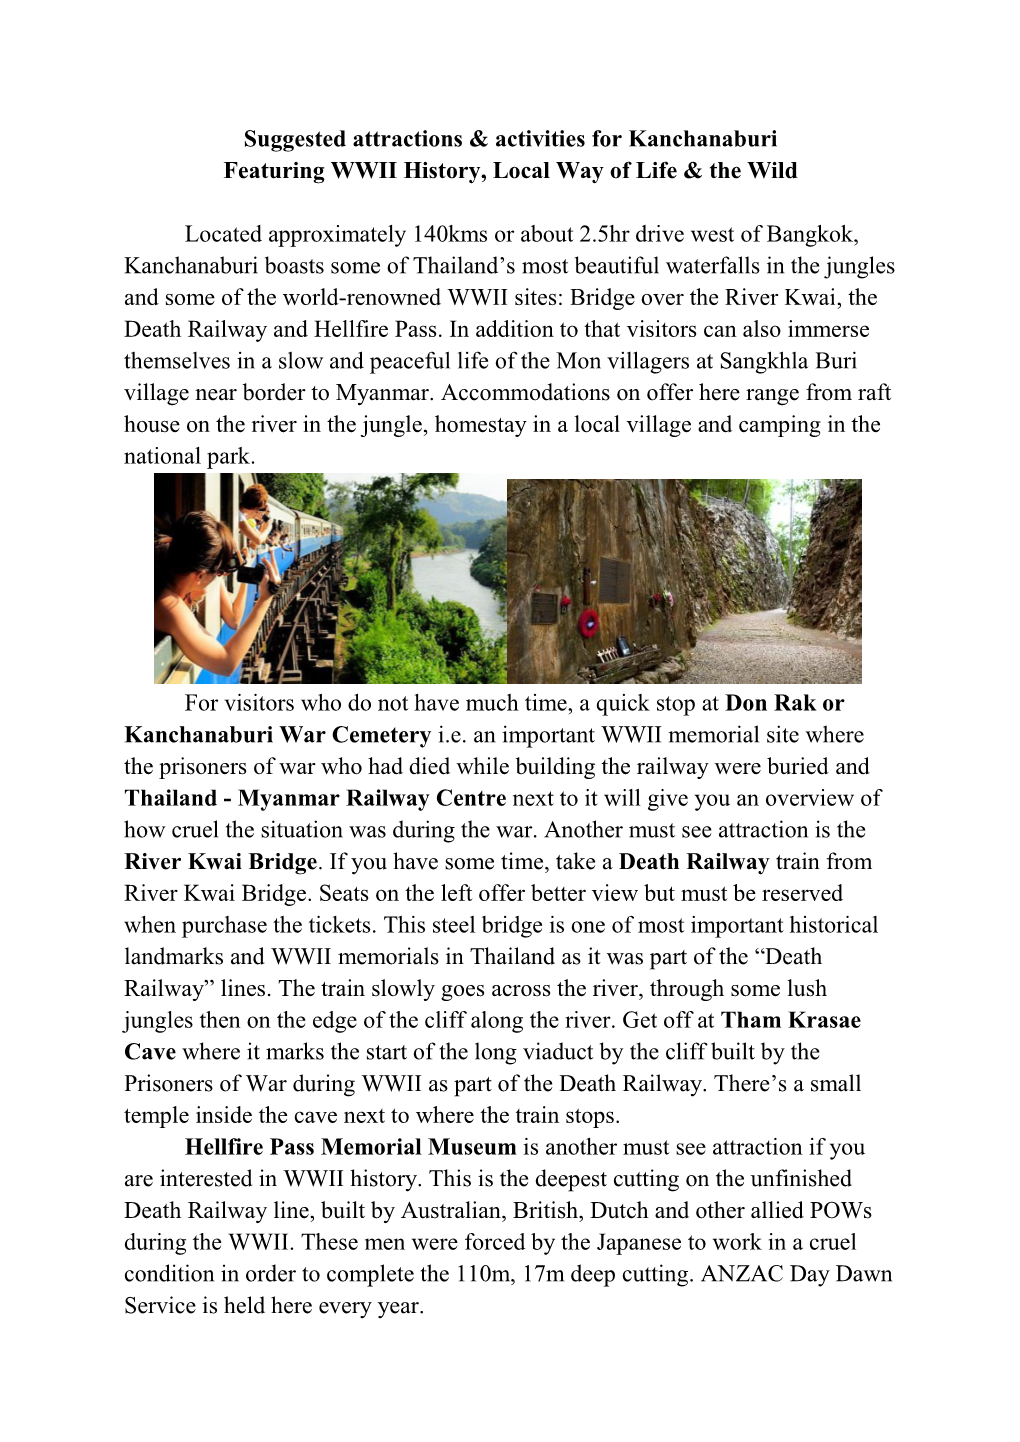 Suggested Attractions & Activities for Kanchanaburi Featuring WWII